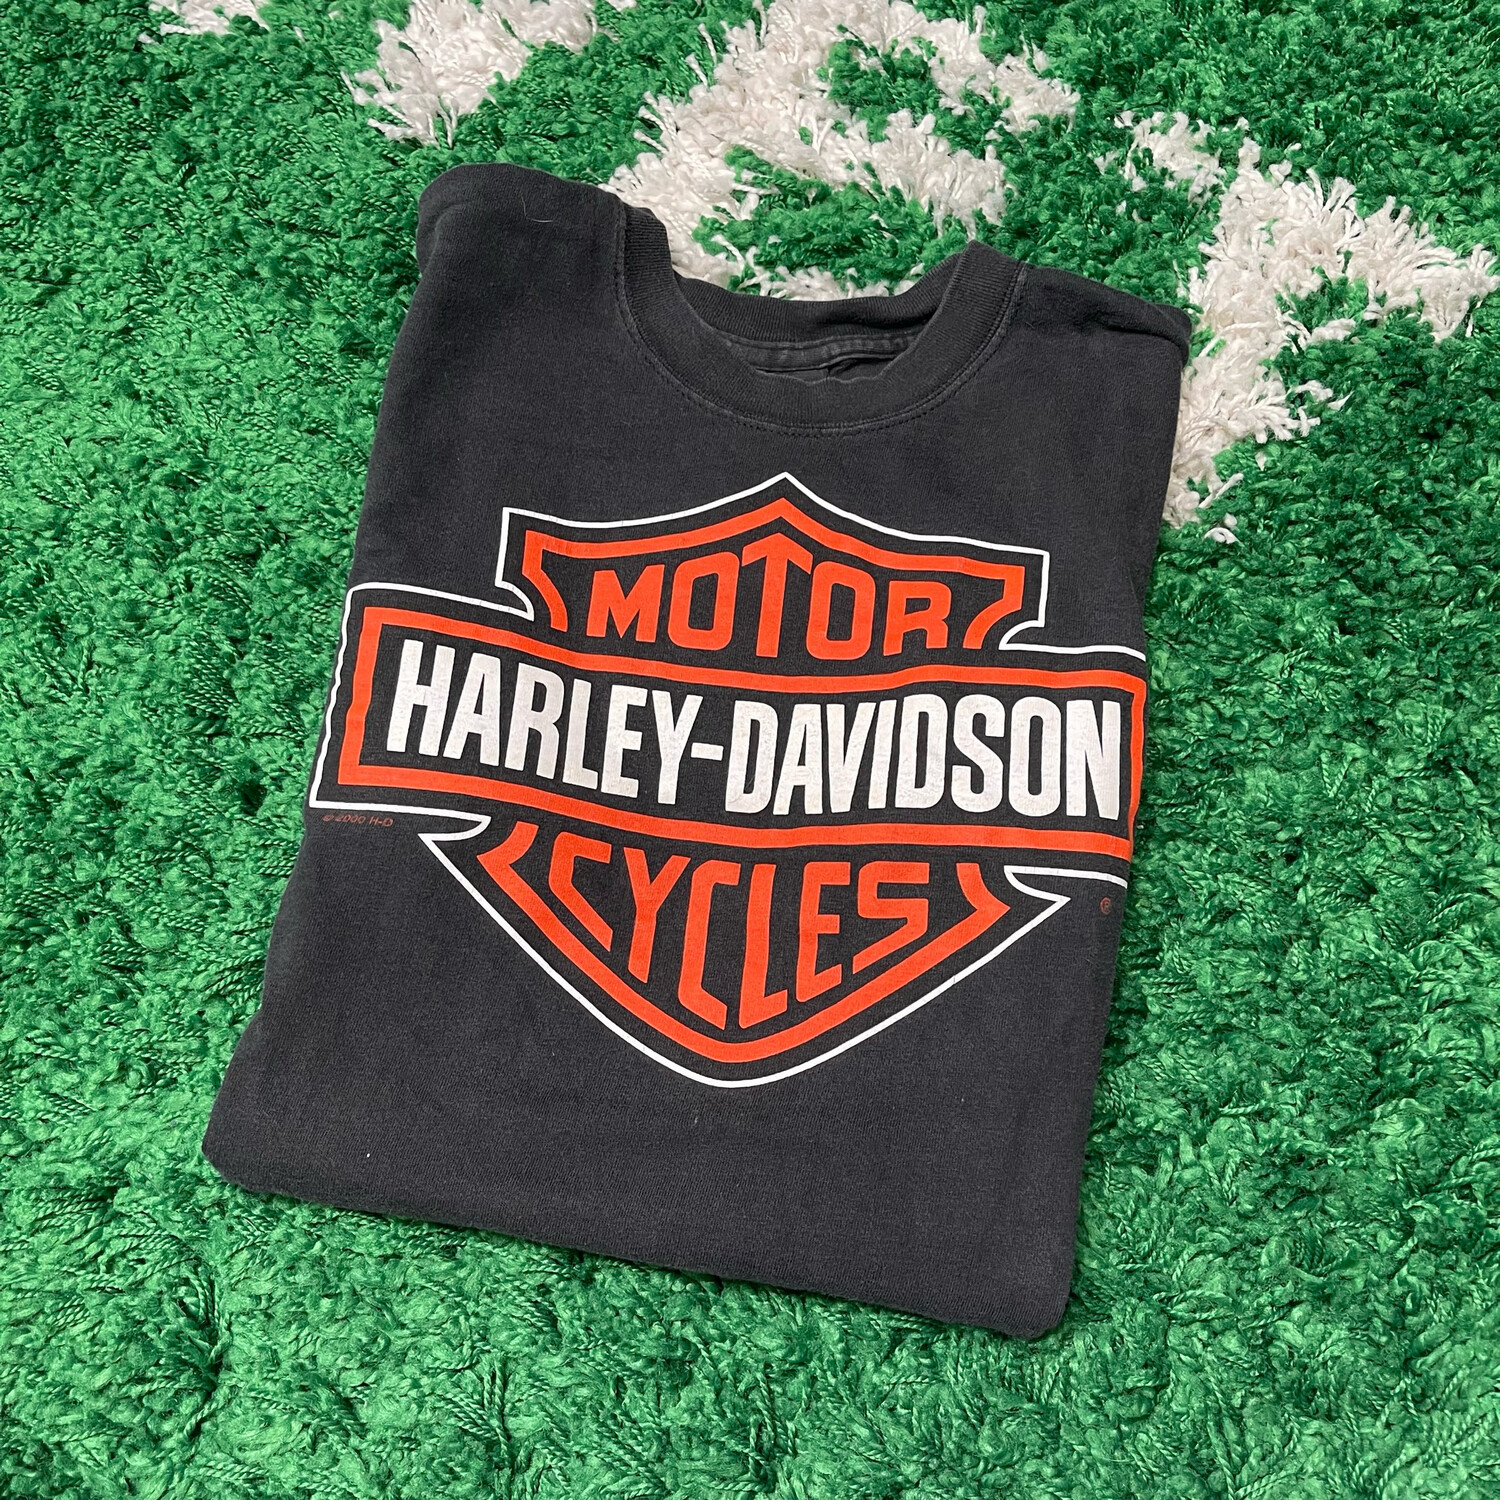 Harley Davidson Youngstown Tee Size Small